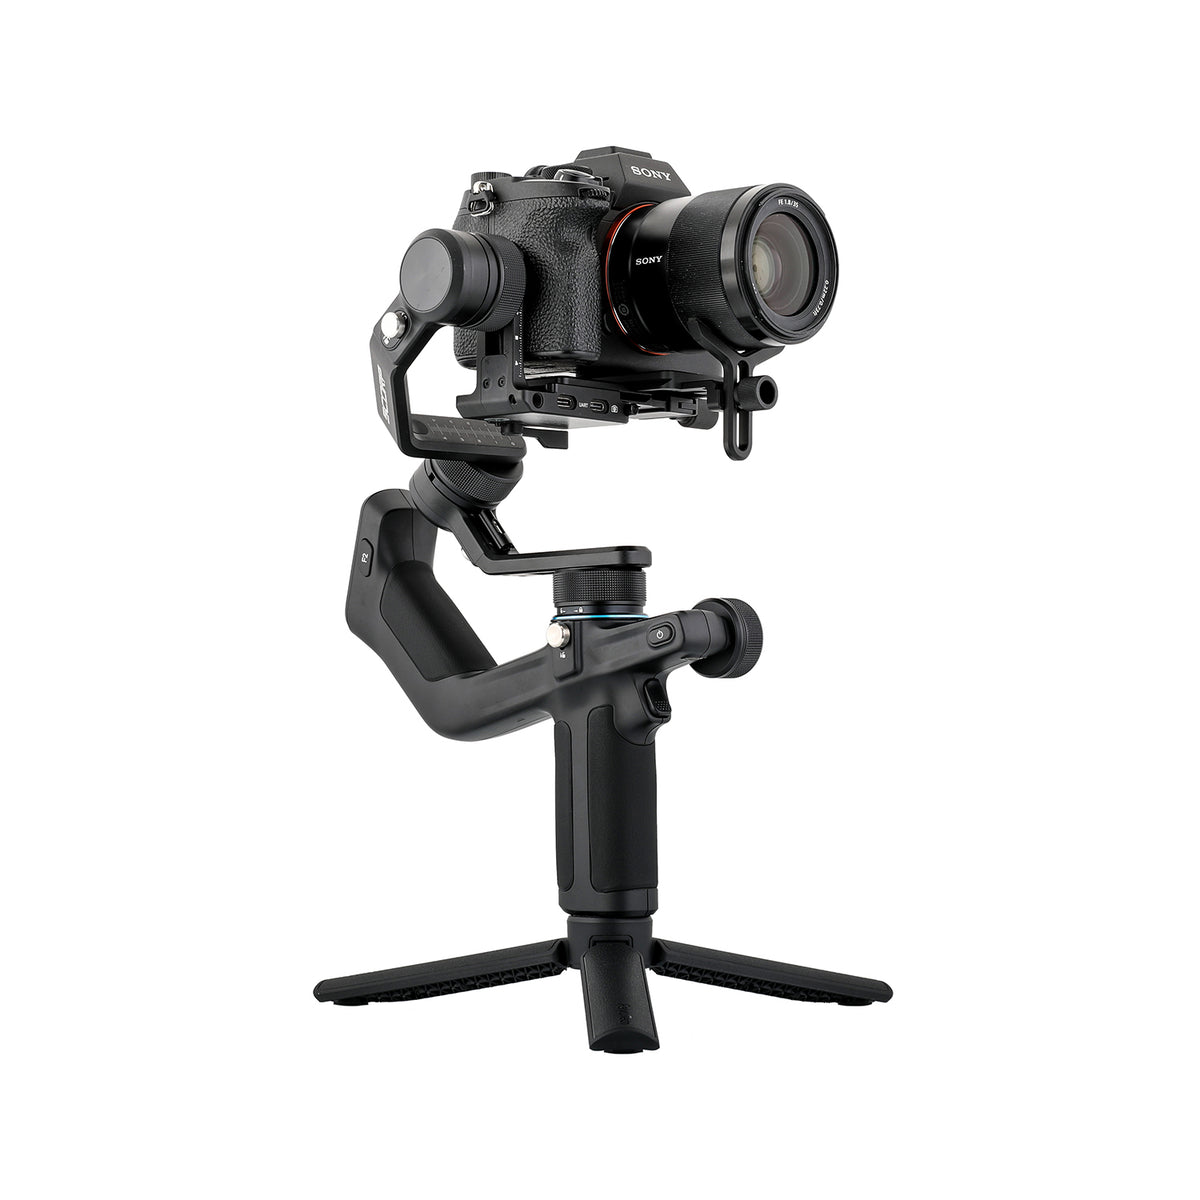 AutoPilot Gimbal: Capture smooth, effortless motion with